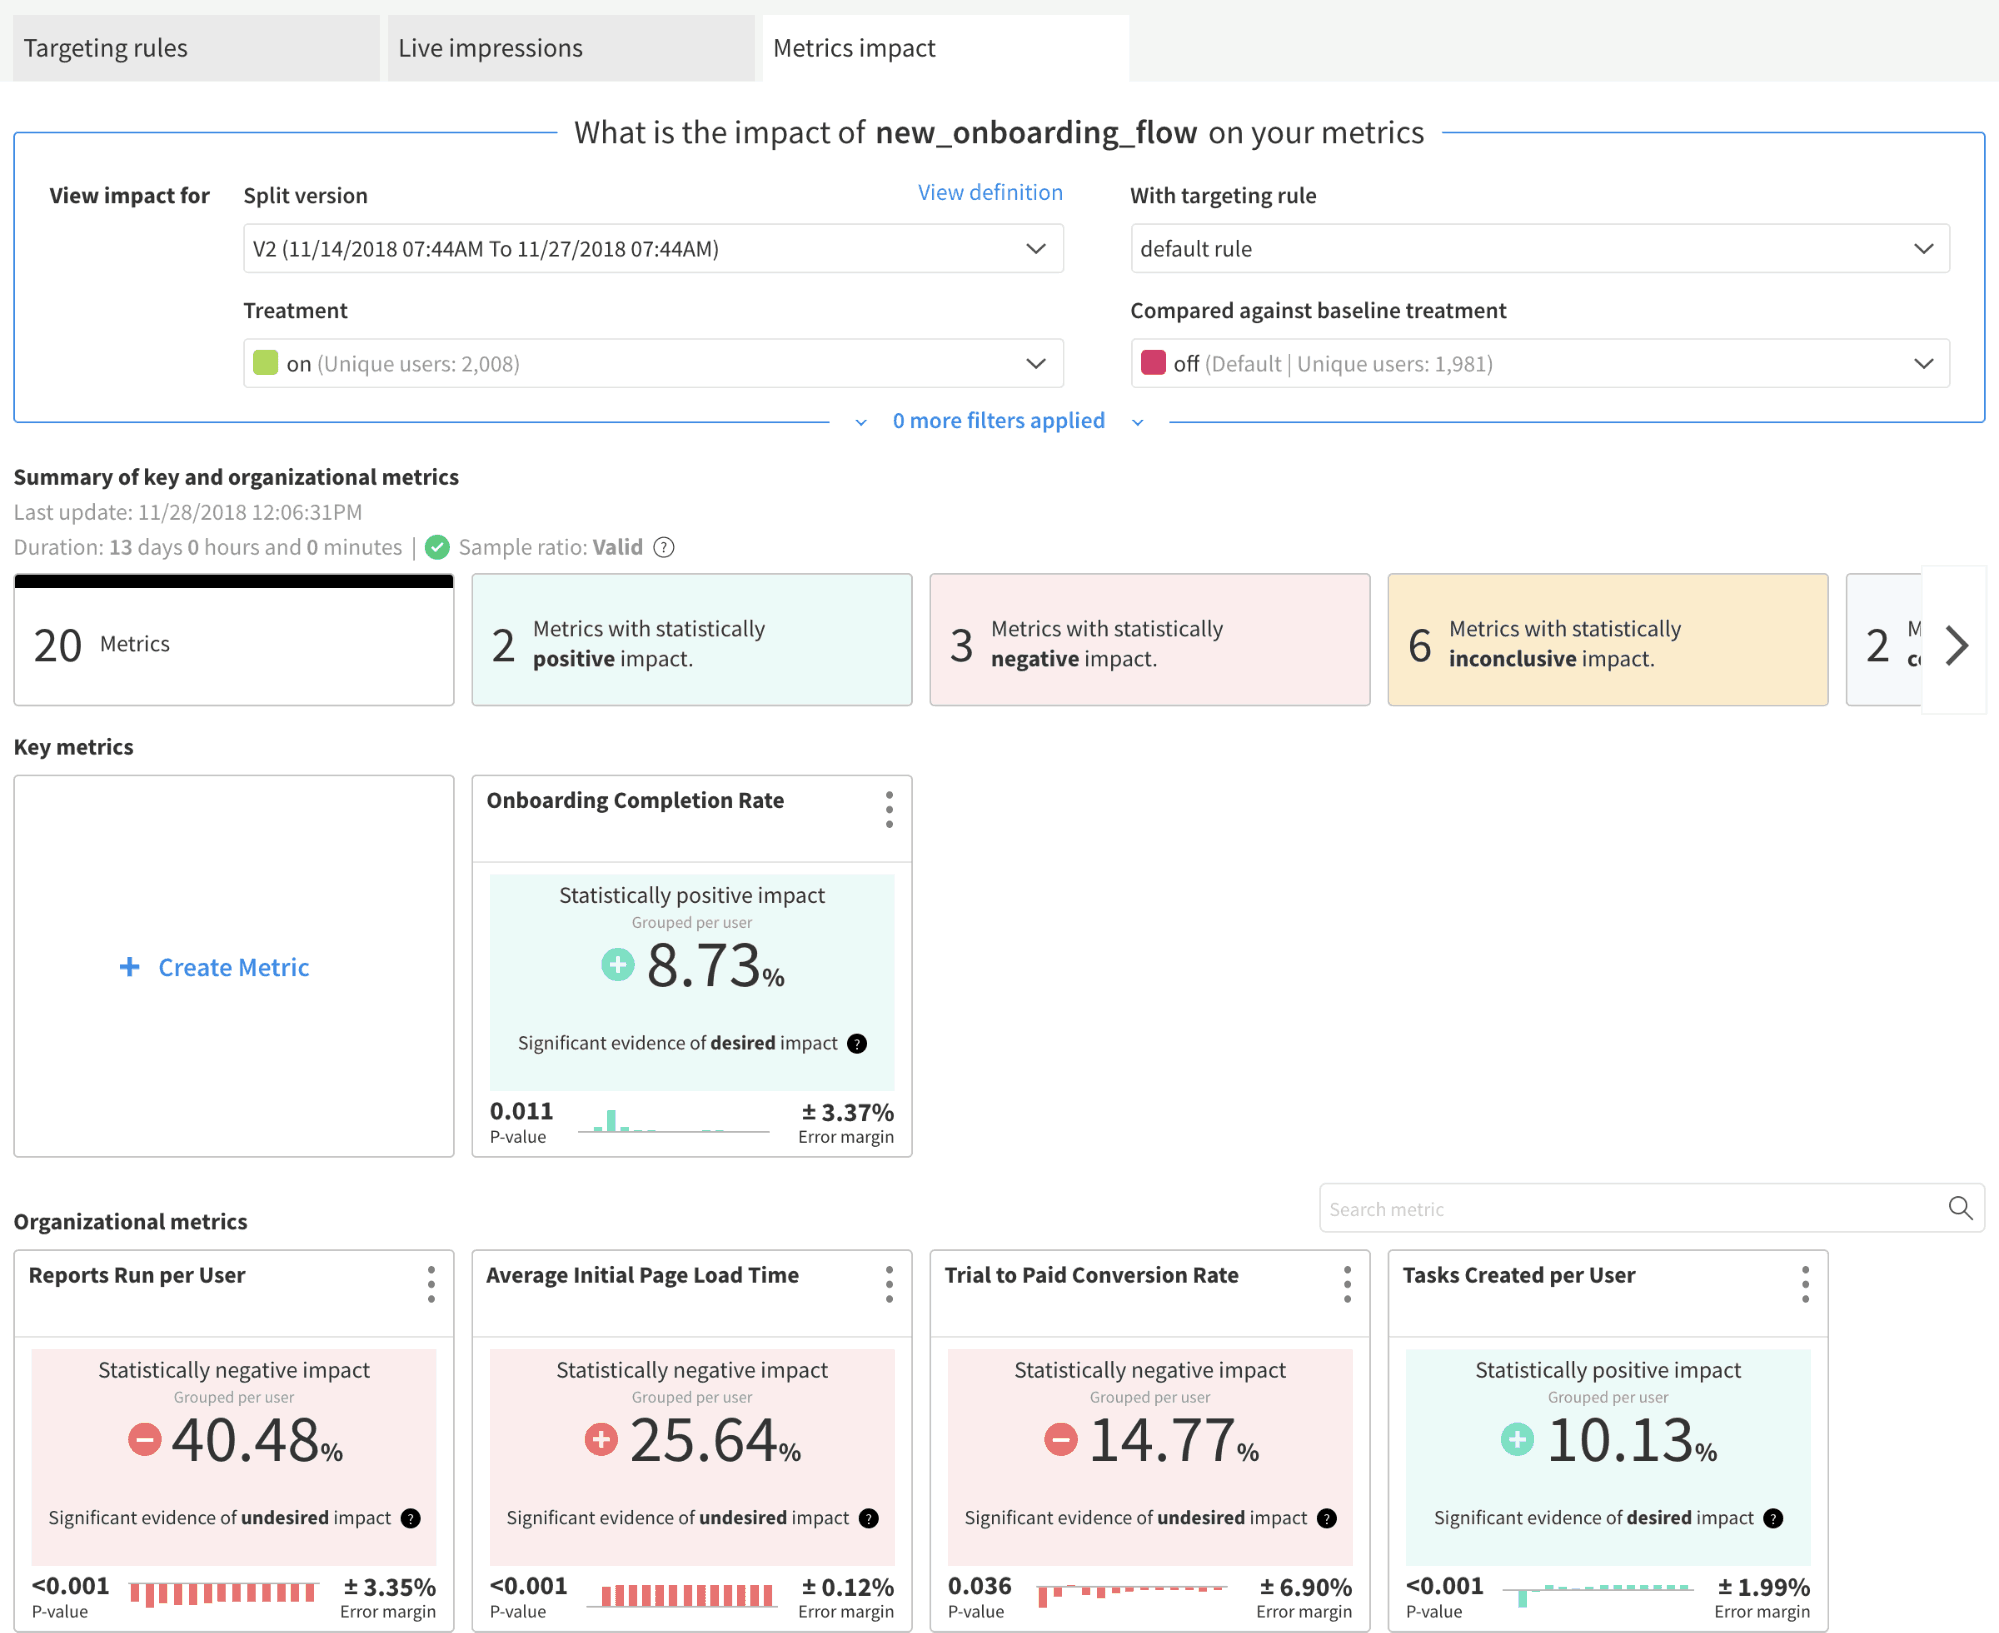 Screenshot of the Metrics Impact page within Split's web console.